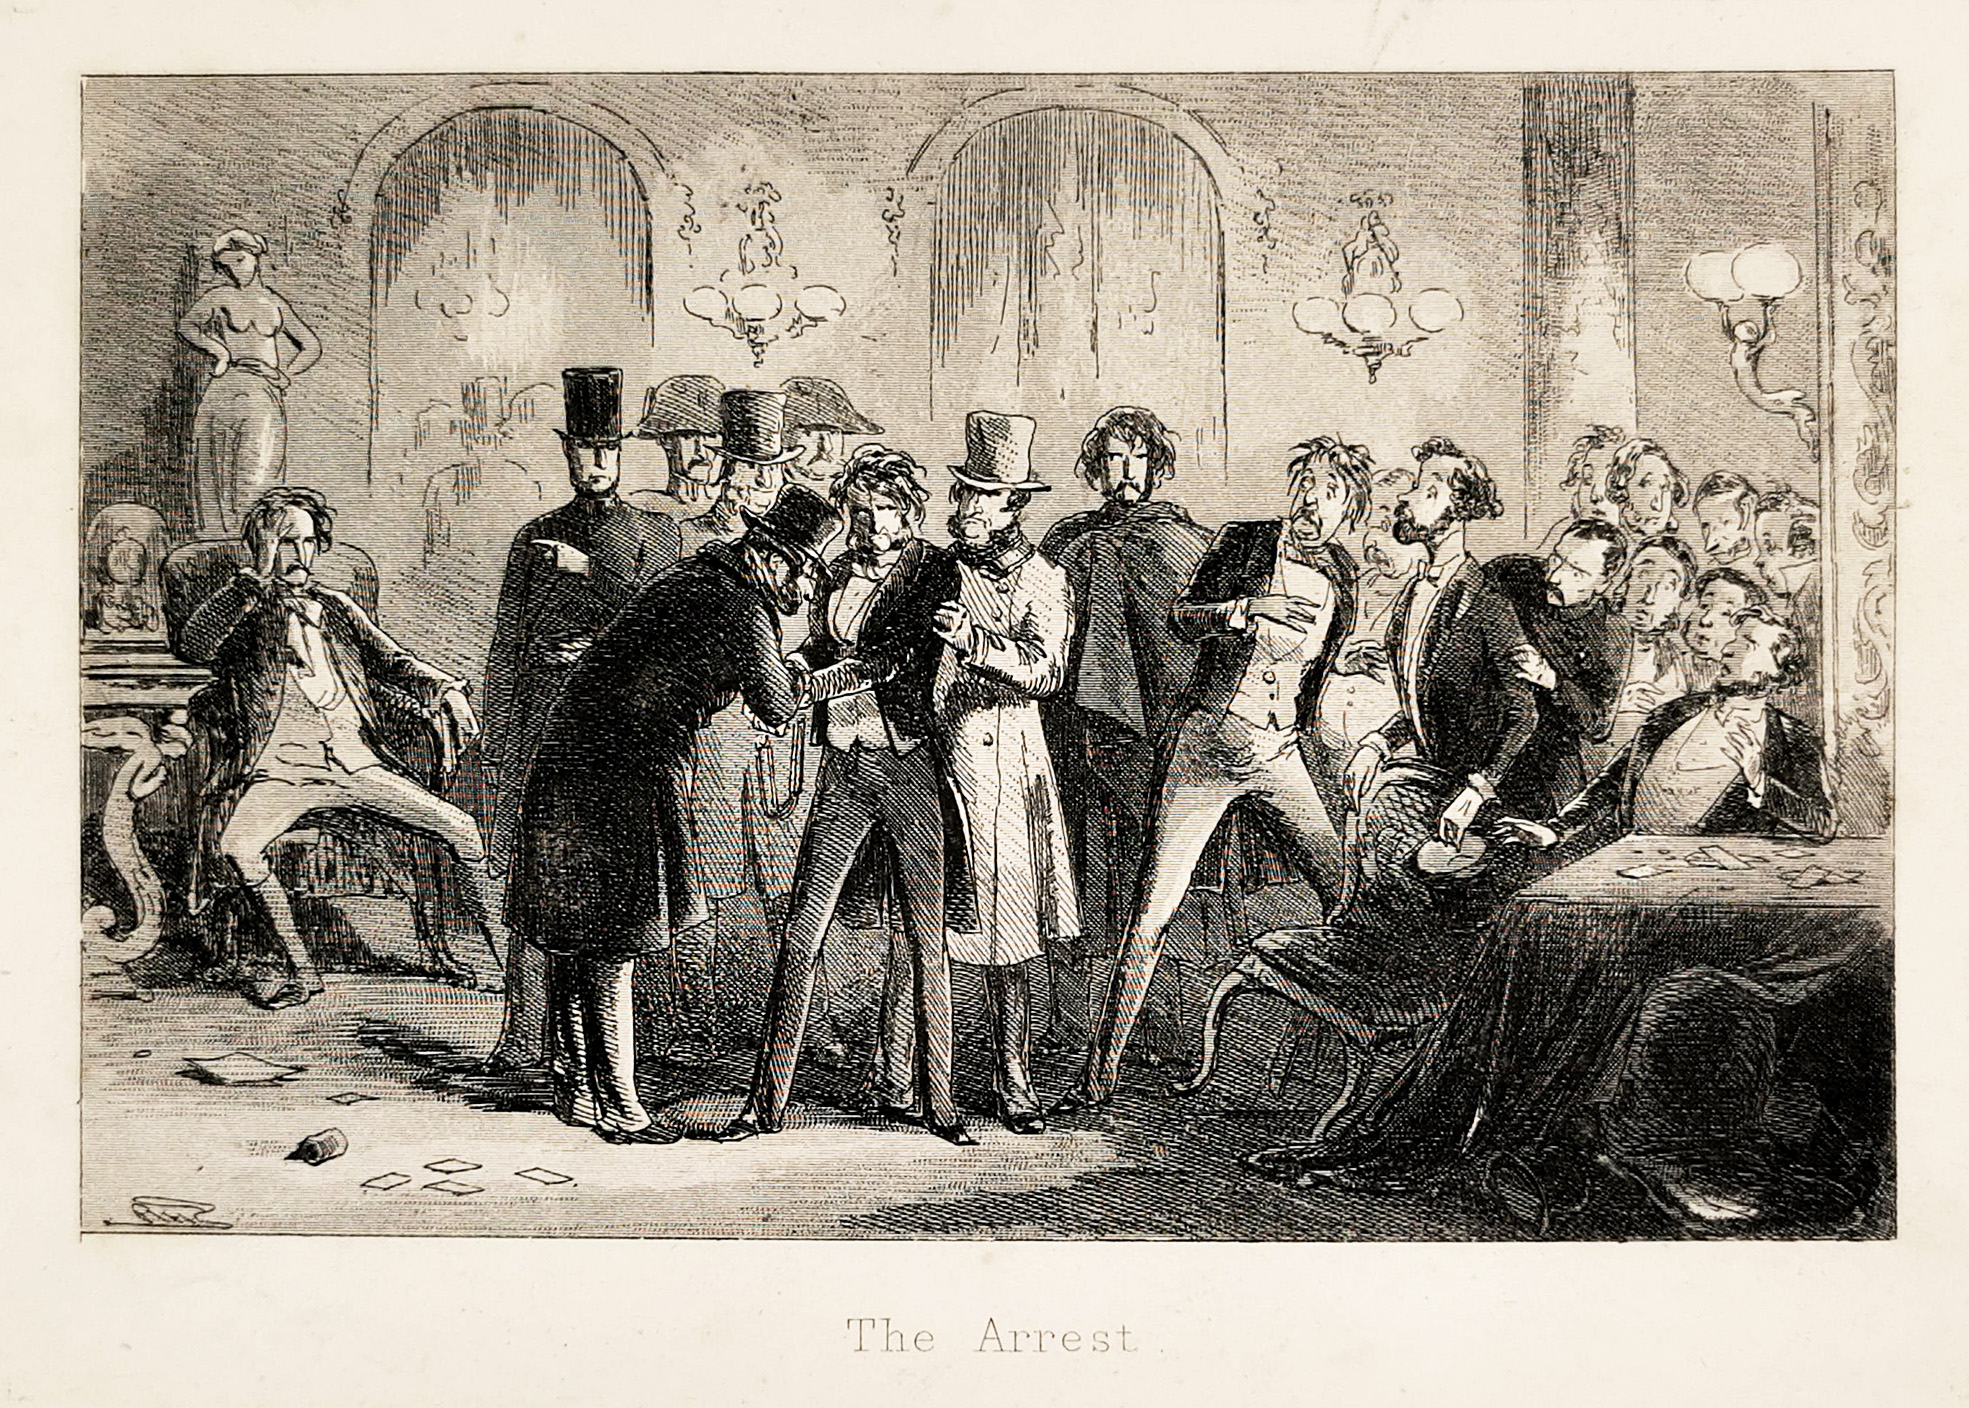 The Arrest - Antique Print from 1840